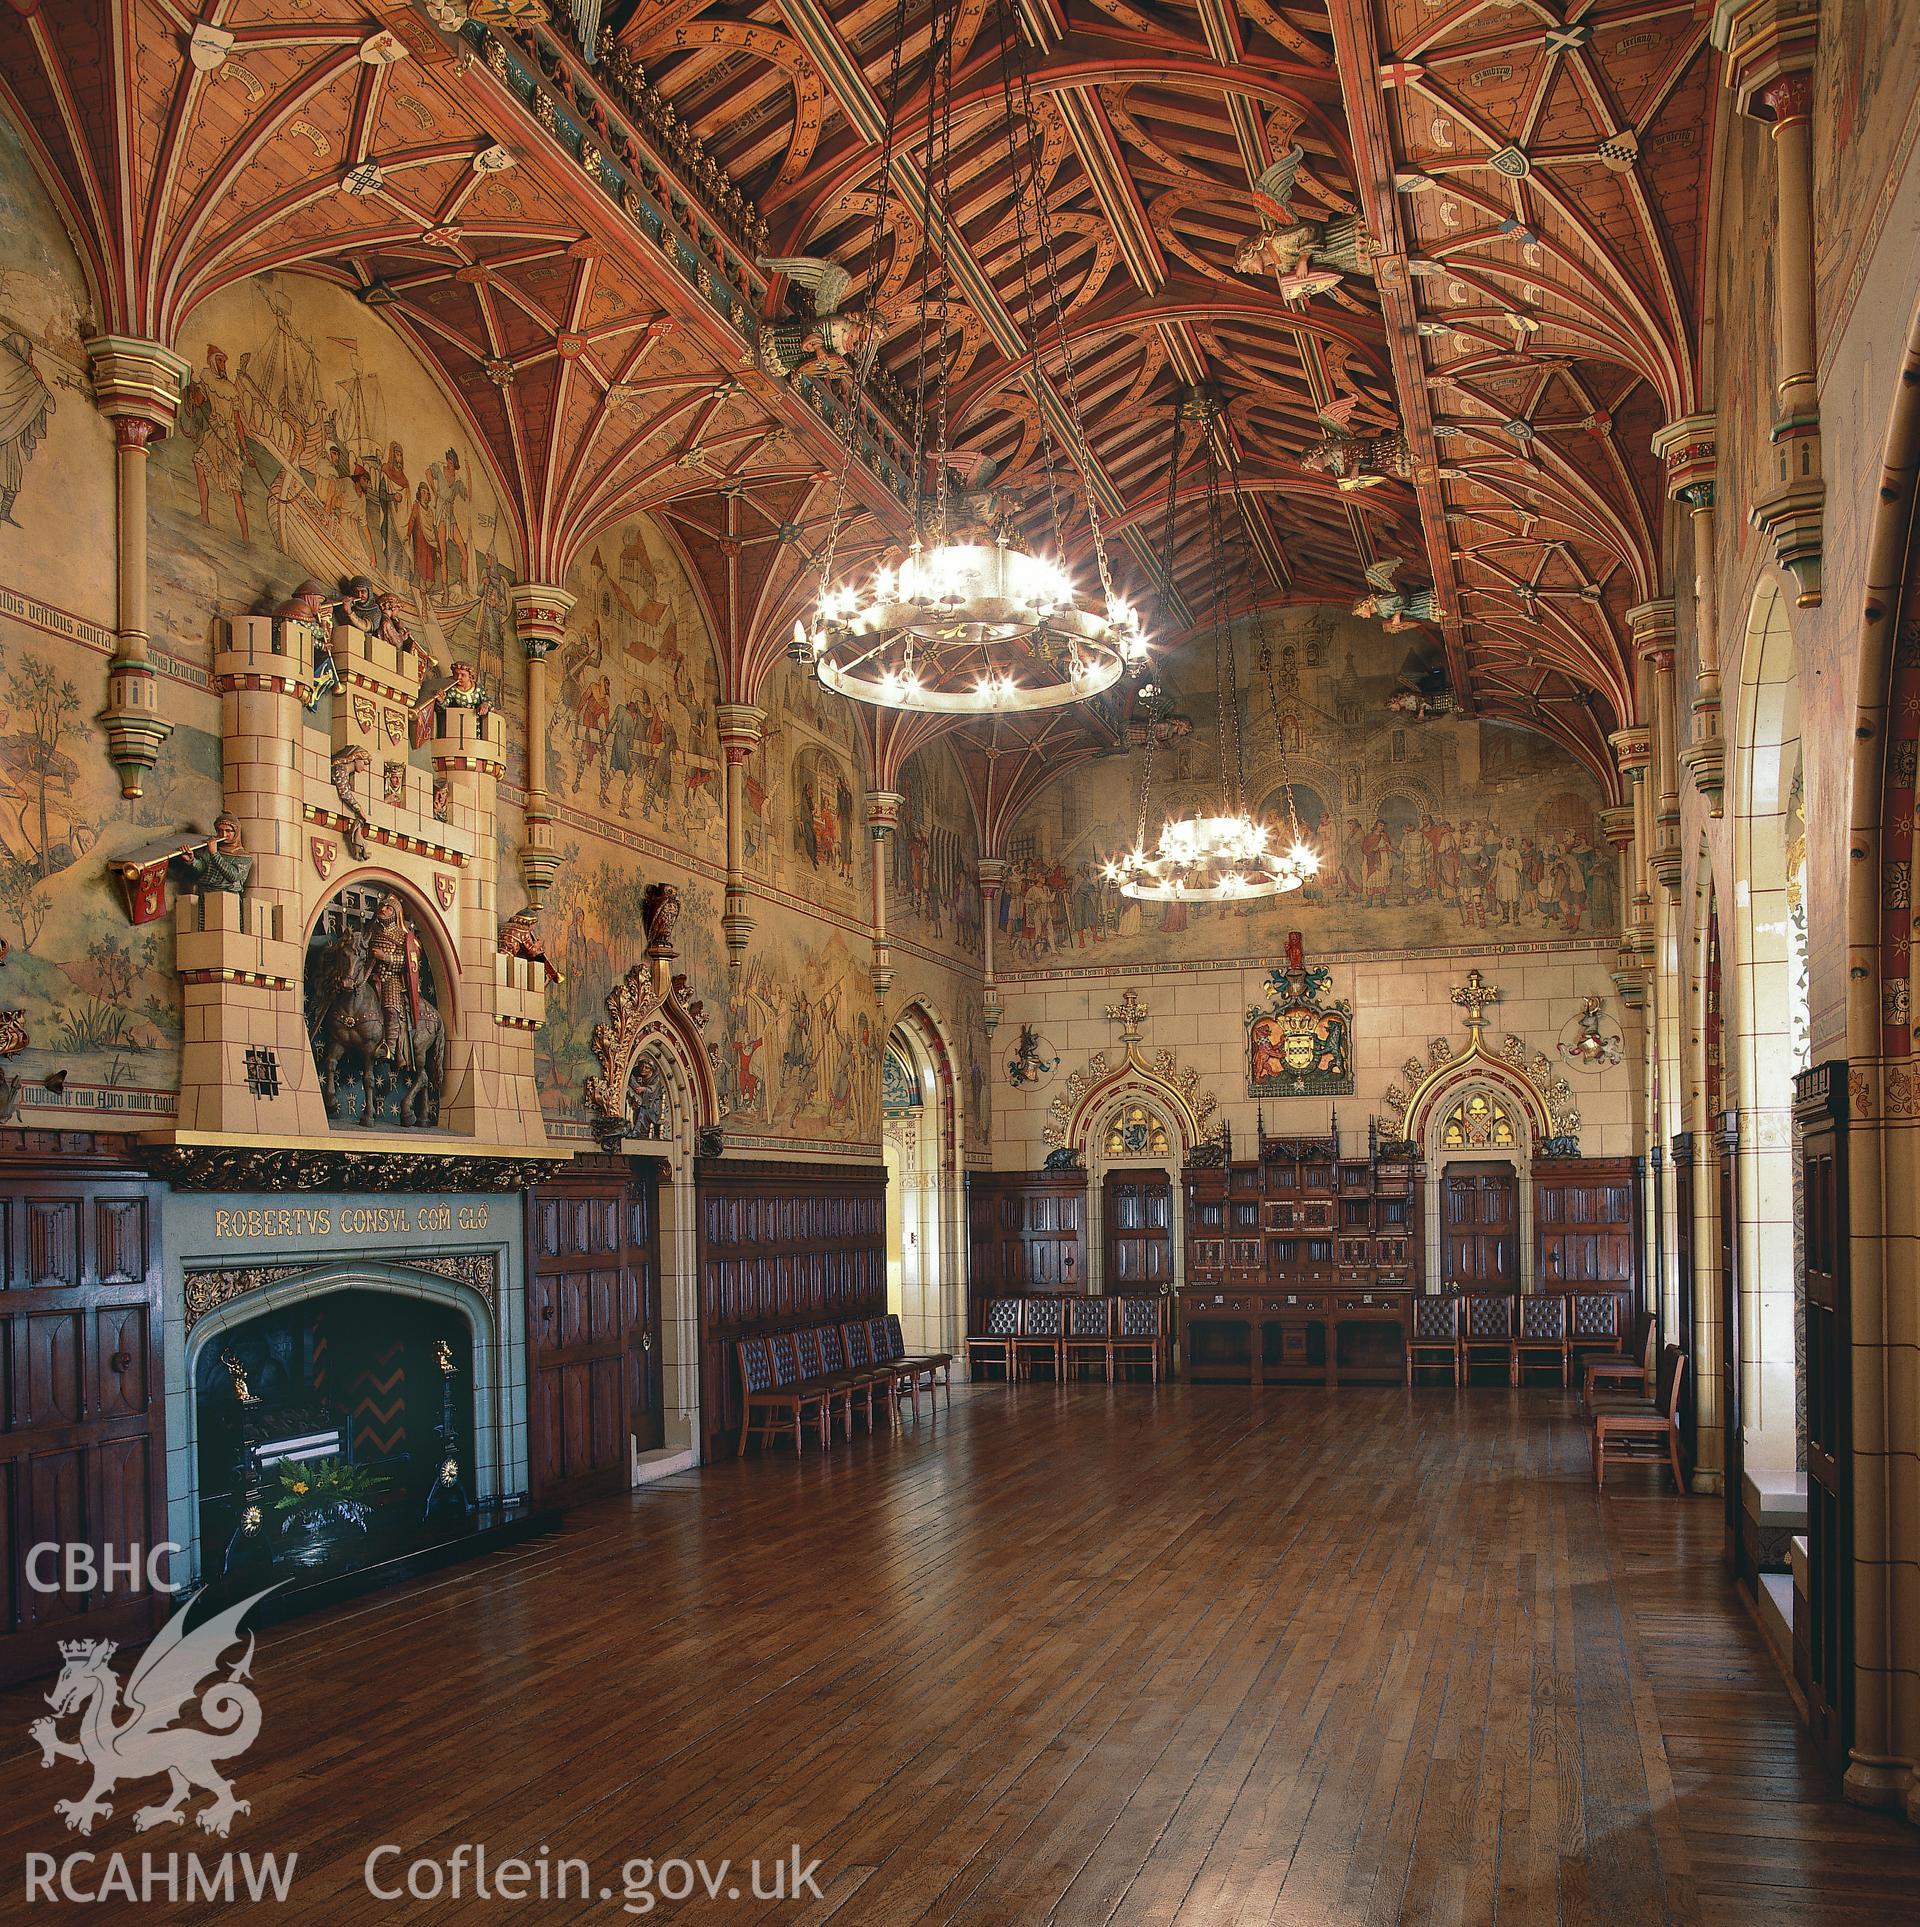 RCAHMW colour transparency of an interior view of the banqueting hall at Cardiff Castle.